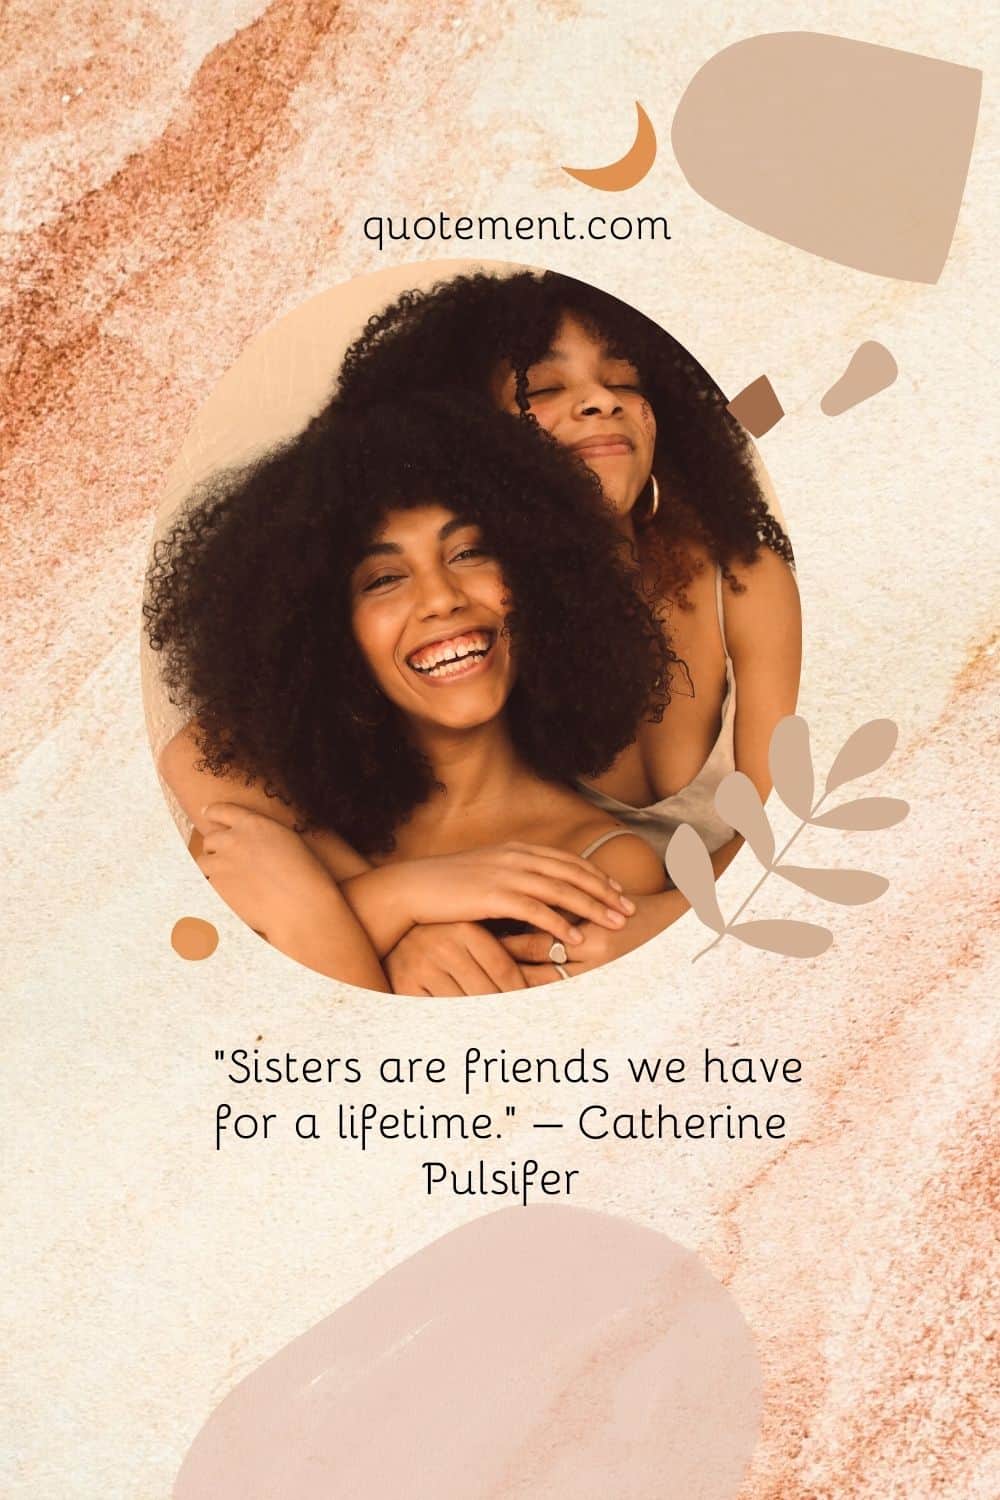 “Sisters are friends we have for a lifetime.” – Catherine Pulsifer